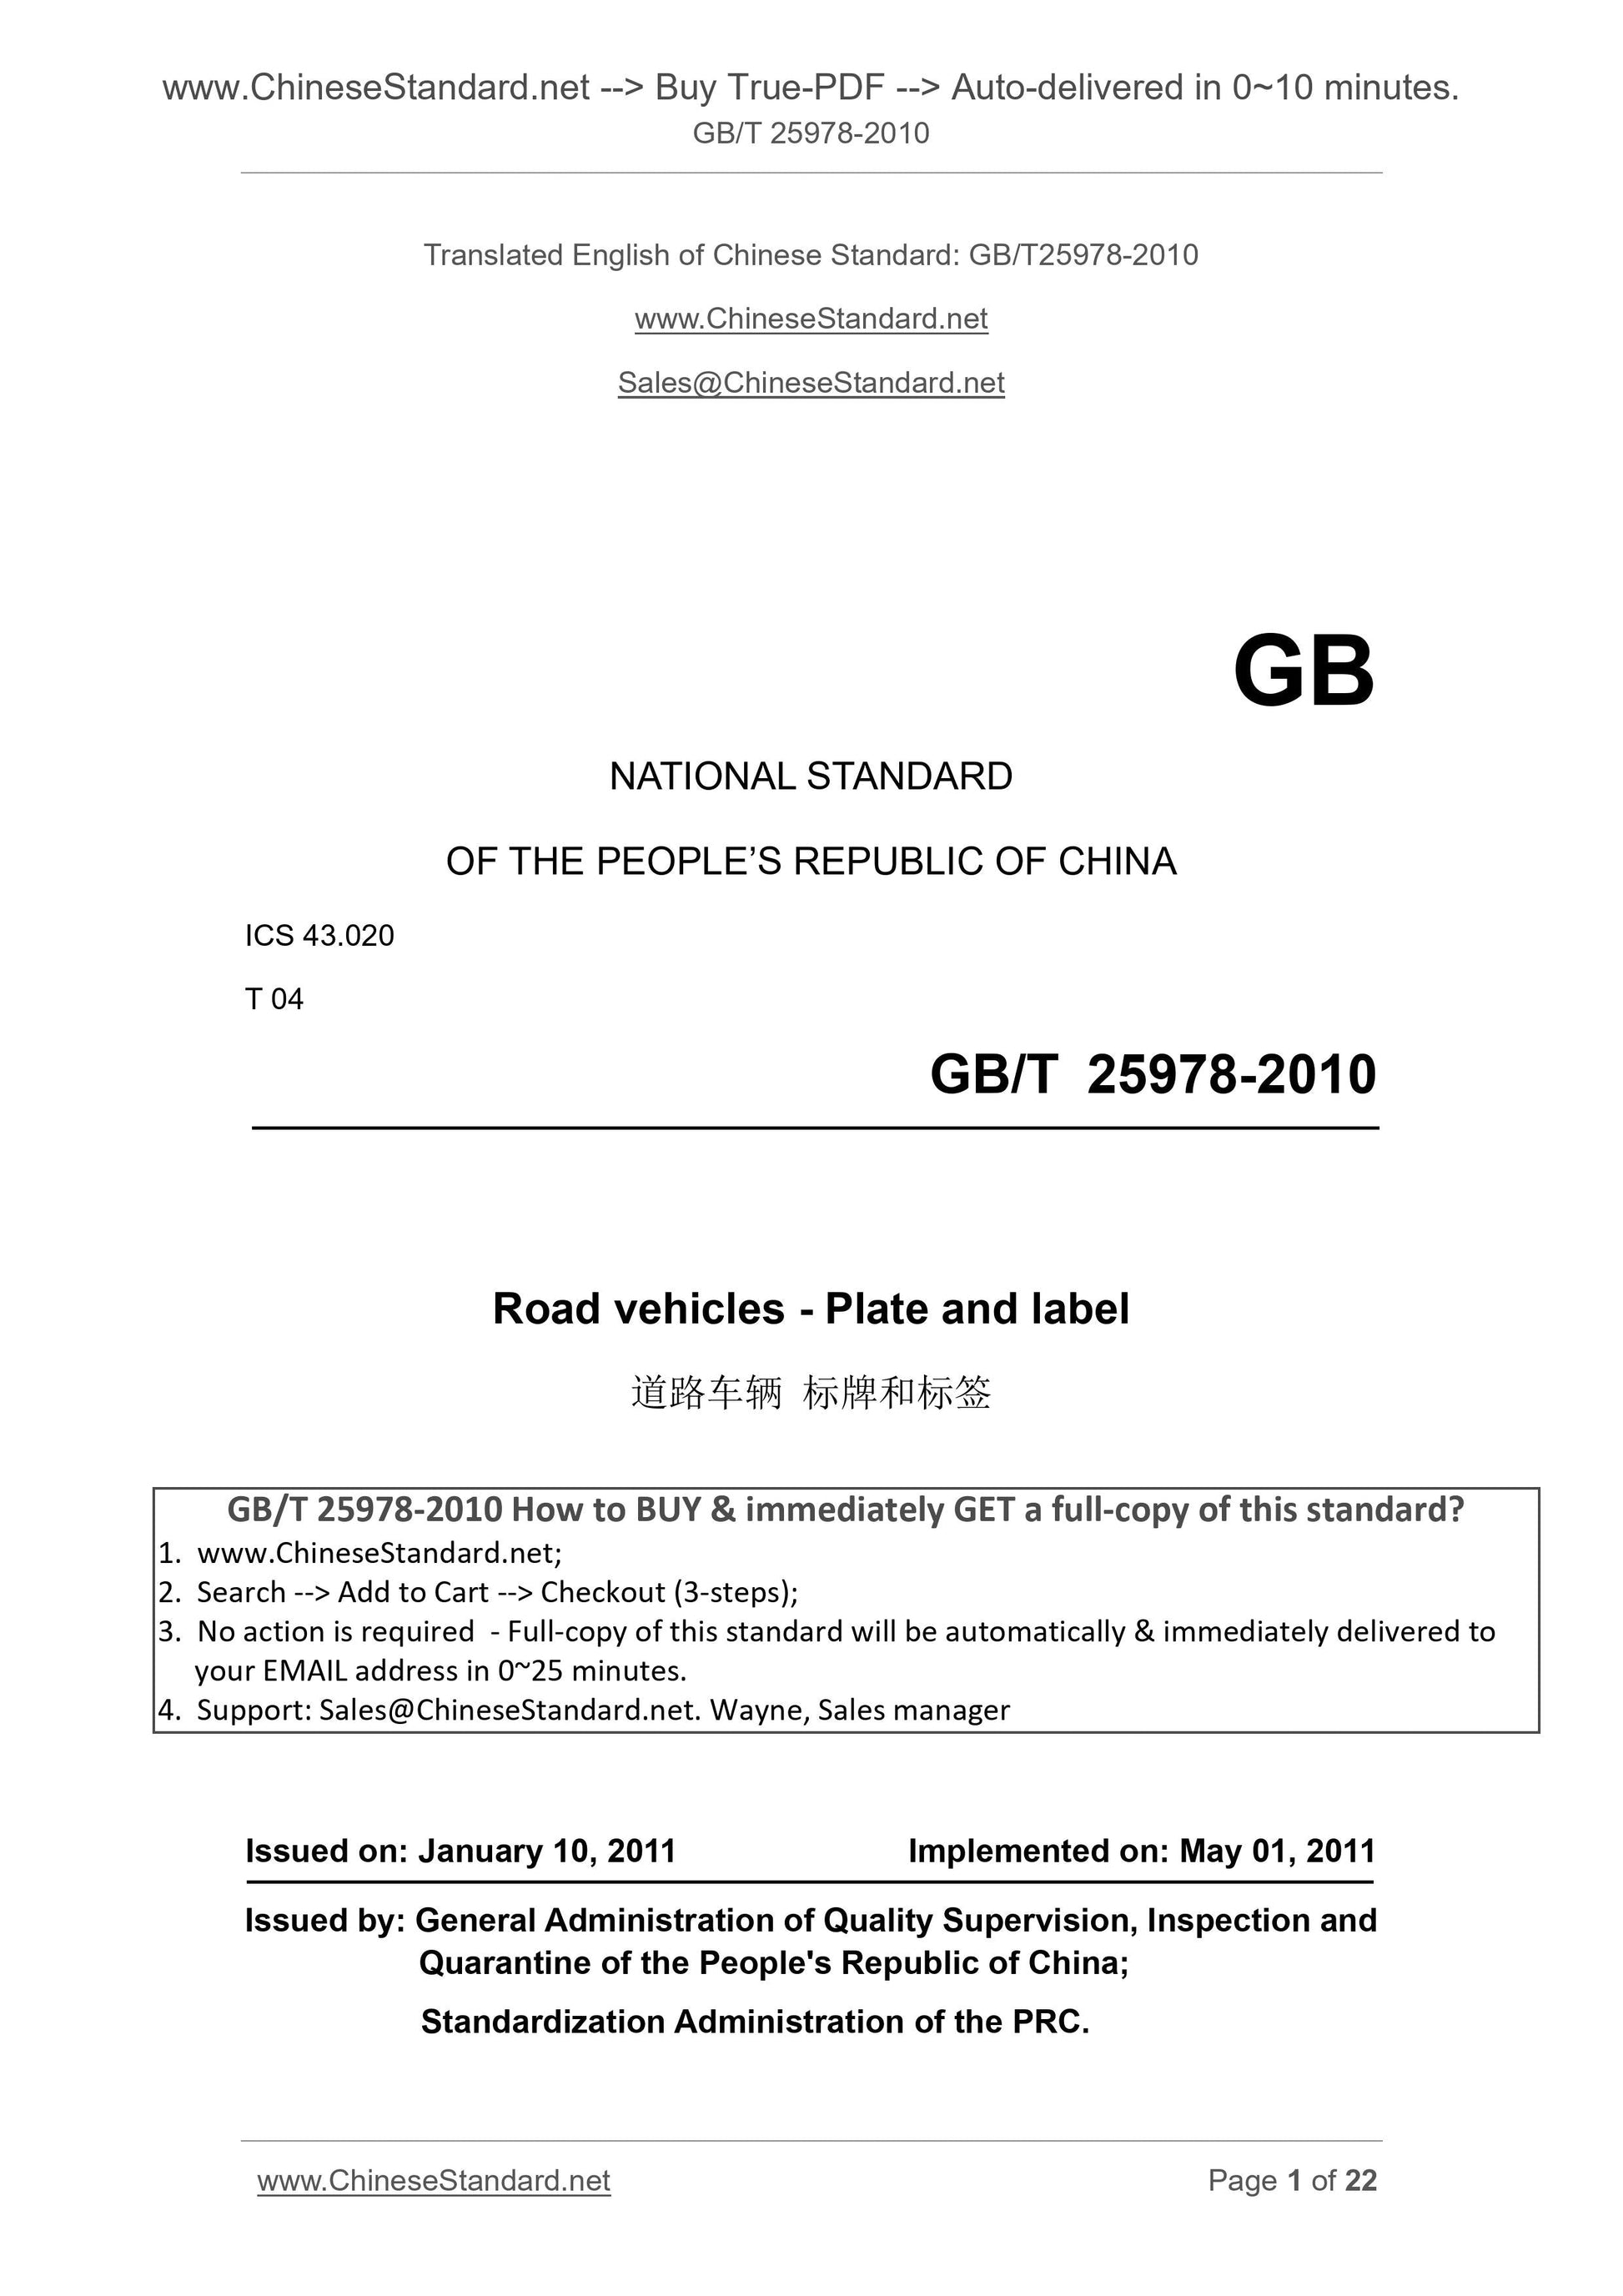 GB/T 25978-2010 Page 1